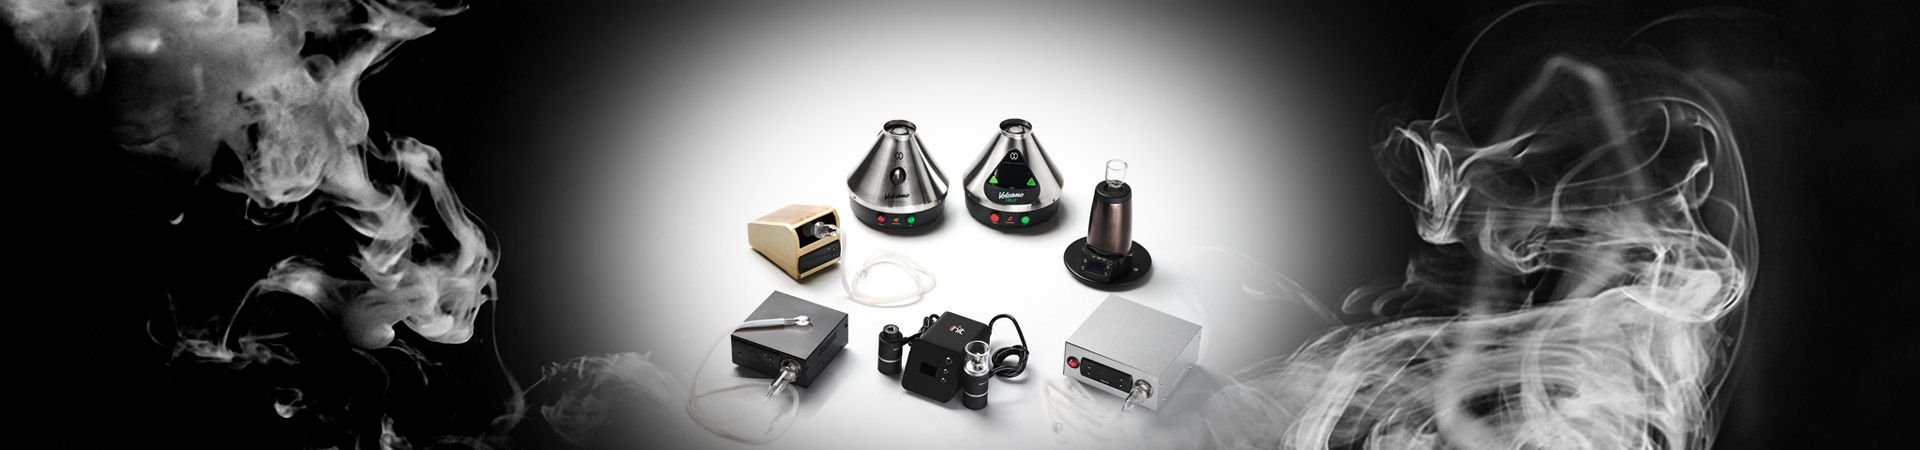 Table vaporizer – not only for the medicine man